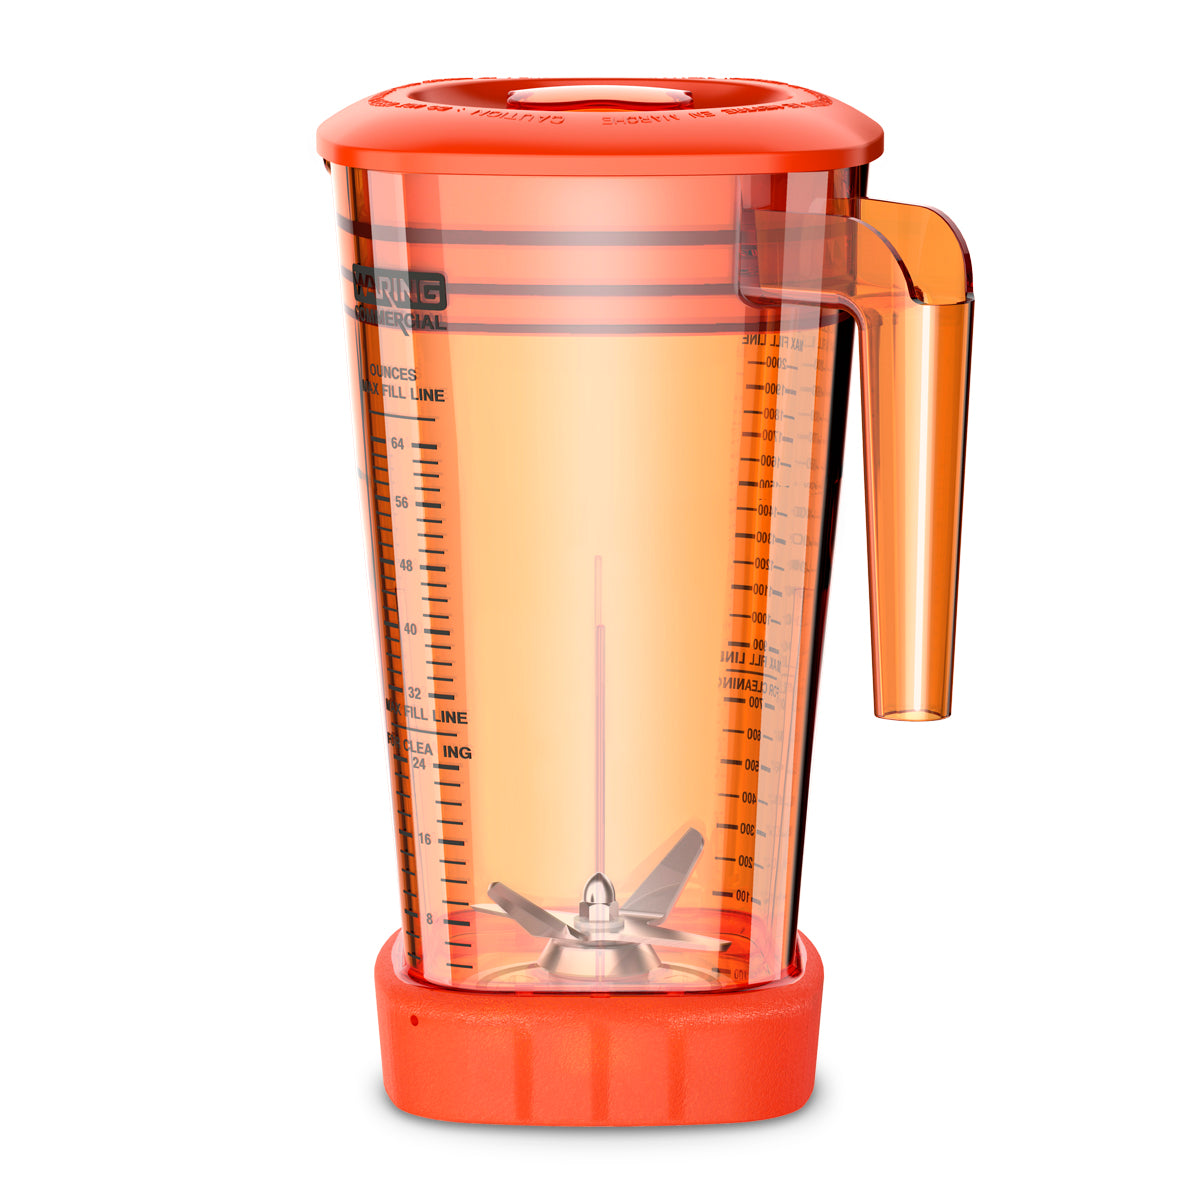 CAC95-28 - "The Raptor" 64-oz. BPA-Free Orange Copolyester Container Complete with Blade and Lid — MX Series